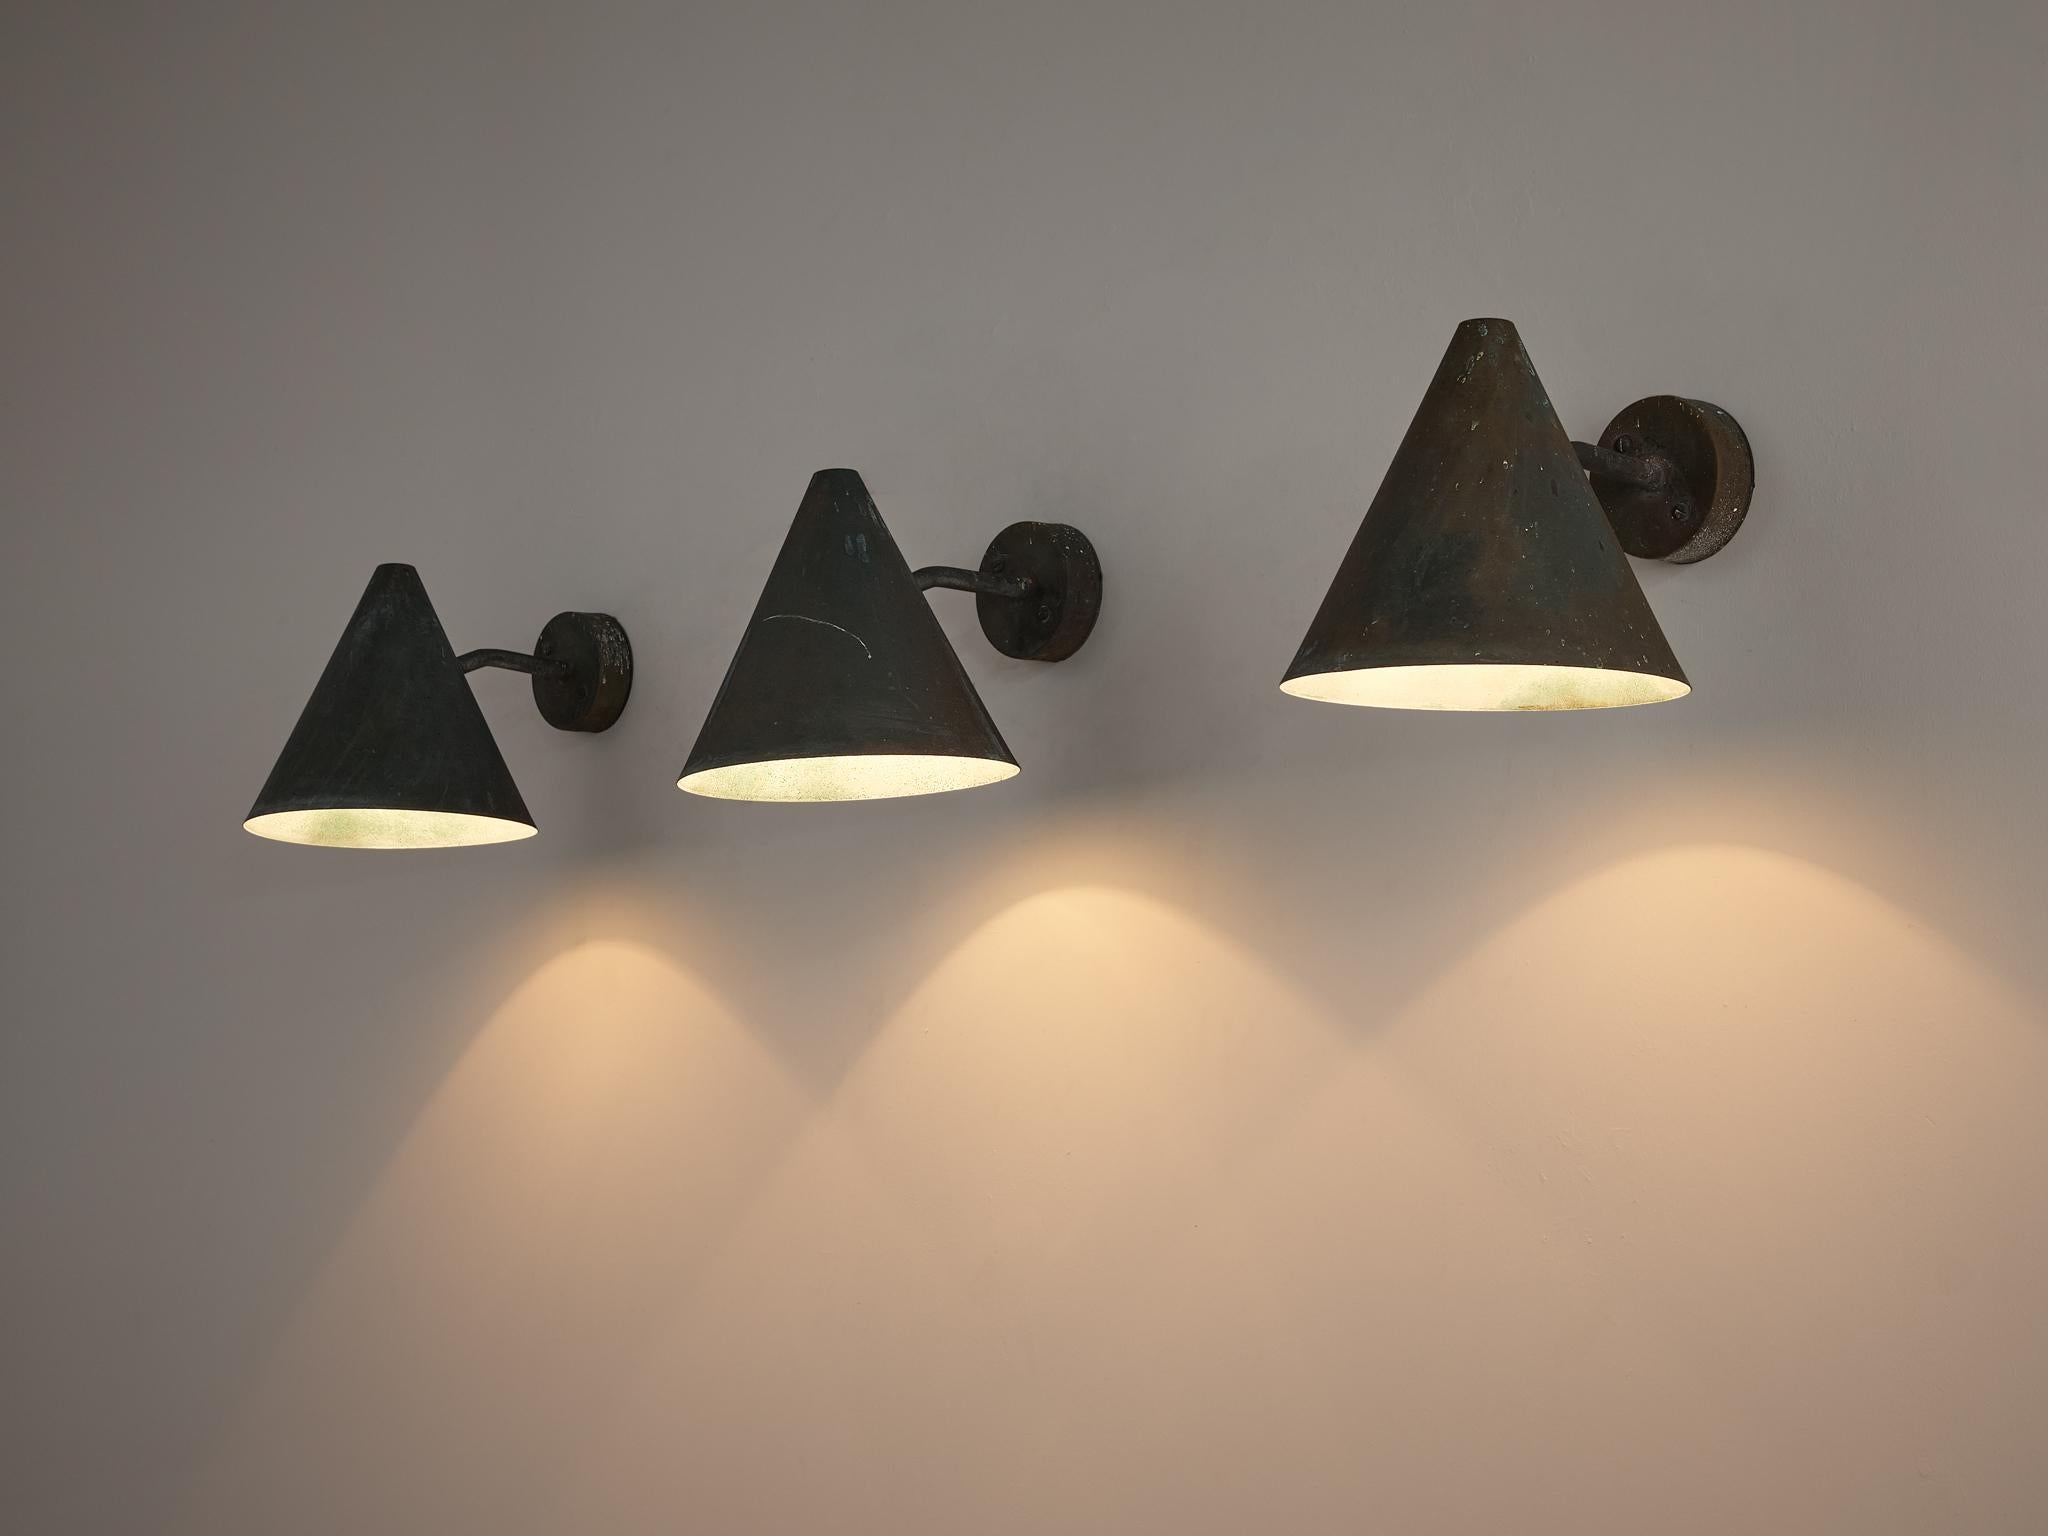 Hans-Agne Jakobsson for Hans-Agne Jakobsson AB in Markaryd, wall lights ‘Tratten’, copper, Sweden, 1950s

Set of cone-shaped wall lights designed by Hans-Agne Jakobsson for AB Markaryd, in beautifully patinated copper with an off-white inside. The